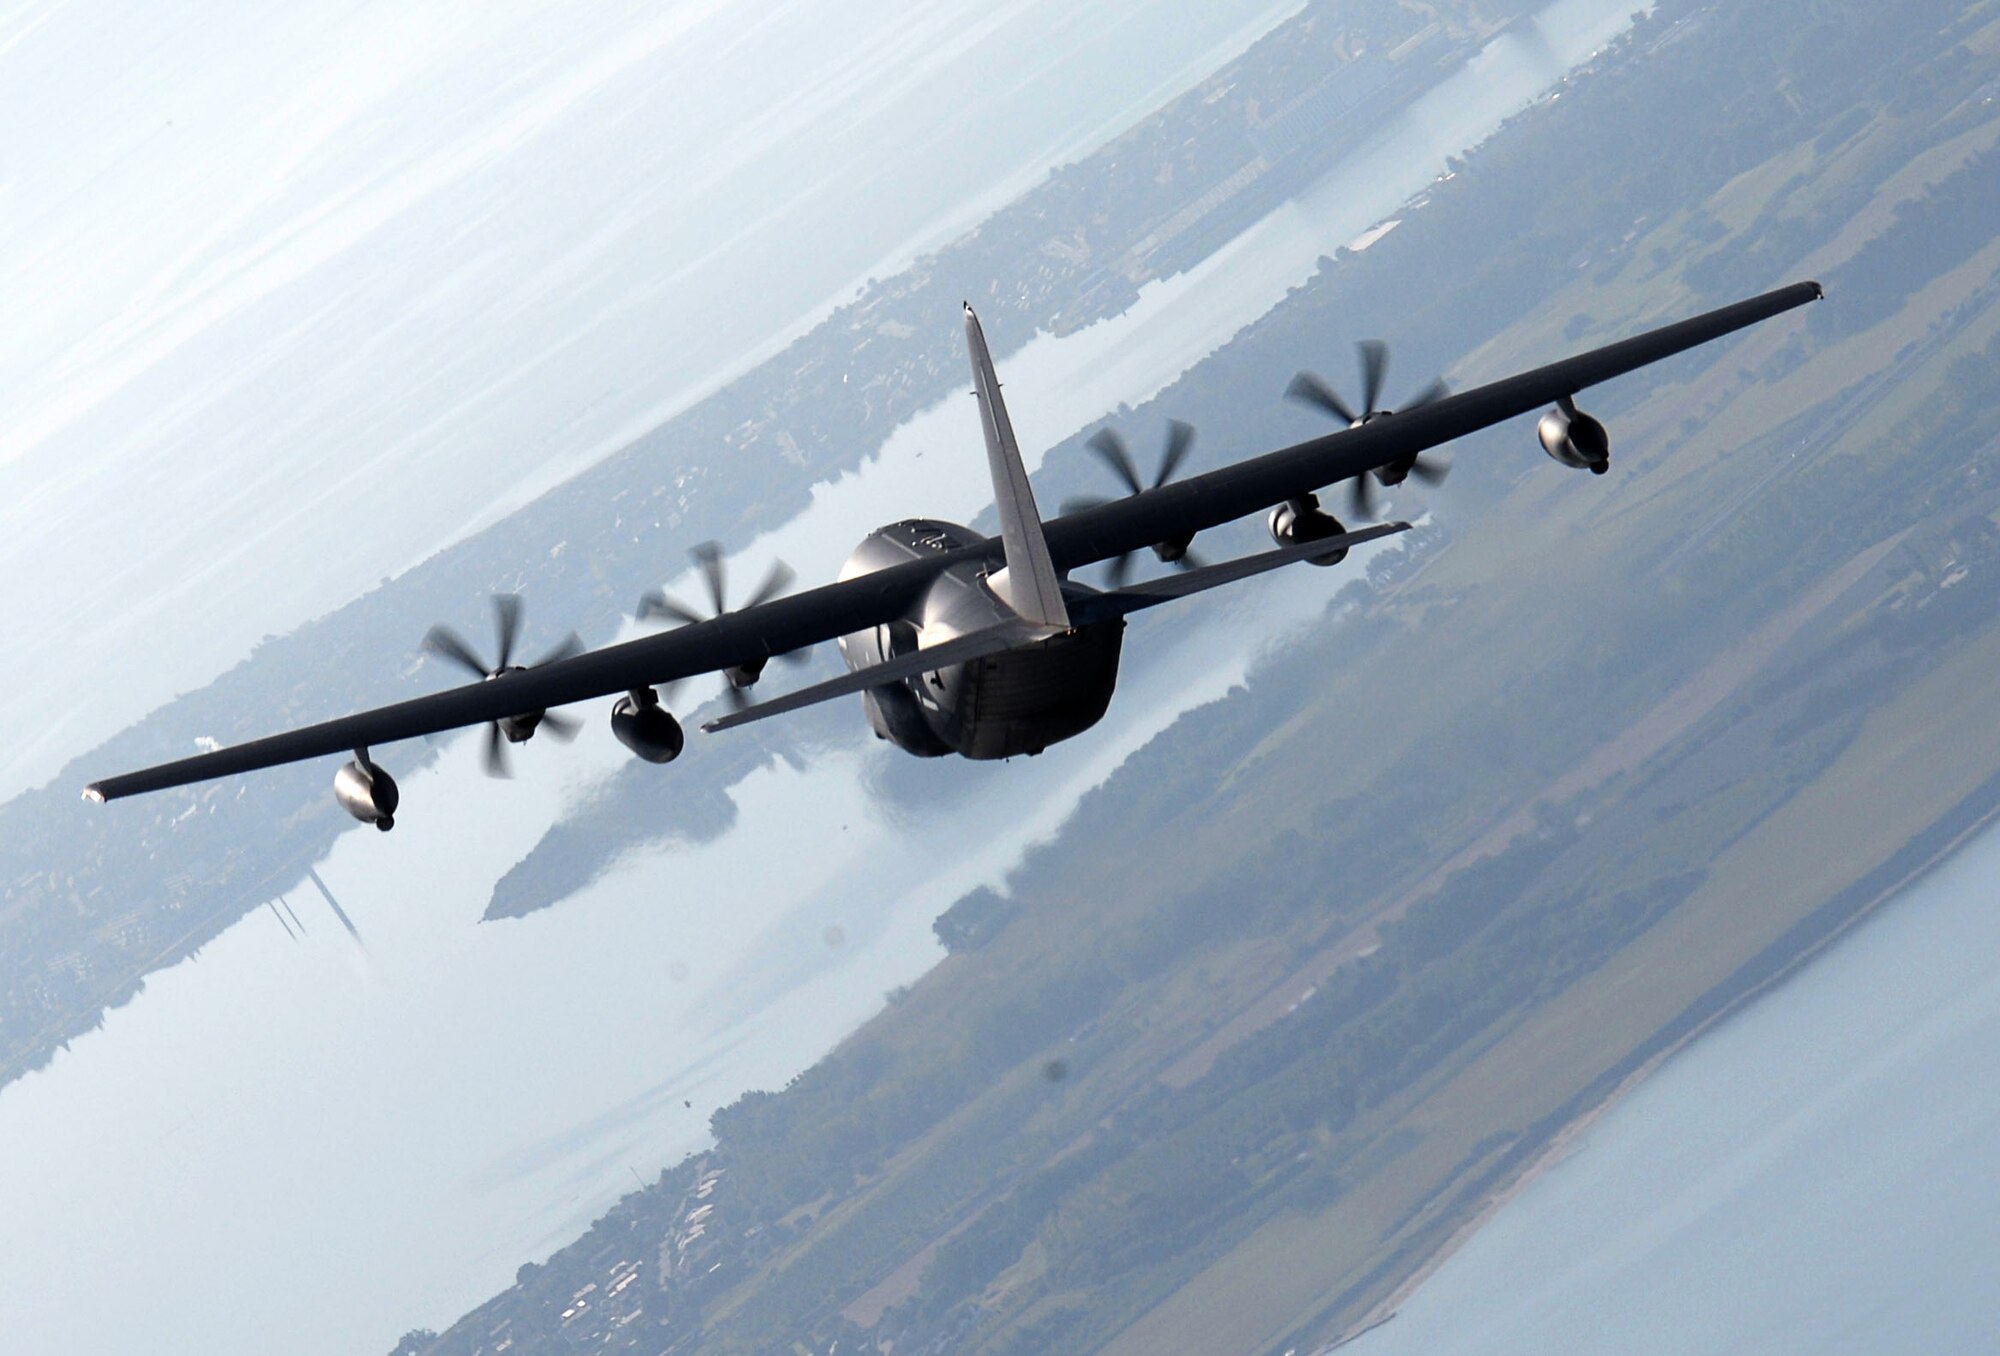 A U.S. Air Force MC-130J Commando II assigned to the 67th Special Operation Squadron flies over the drop zone near the Little Belt Strait in Denmark Sept. 27, 2016. The aircraft was one of three C-130s participating in the 2016 Night Hawk exercise testing joint force capabilities between Airmen, U.S. Navy Special Warfare Combatant-Craft crewmen and Danish air commandos. (U.S. Air Force photo by Senior Airman Justine Rho)